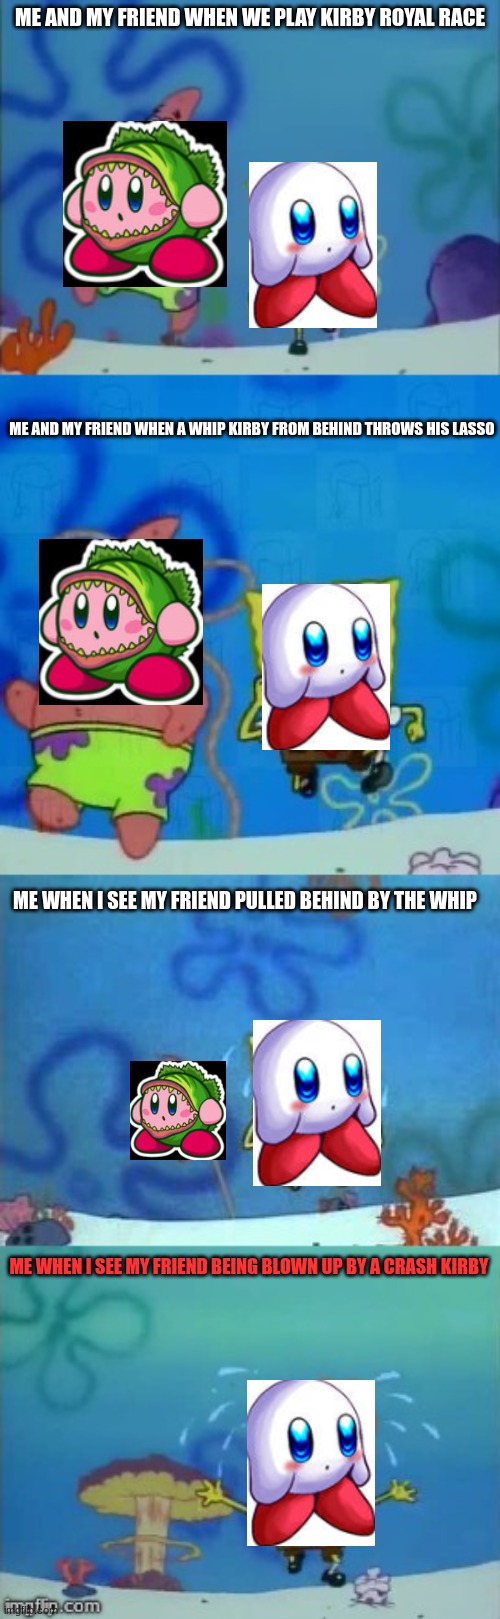 Hazards of being in the lead | ME AND MY FRIEND WHEN WE PLAY KIRBY ROYAL RACE; ME AND MY FRIEND WHEN A WHIP KIRBY FROM BEHIND THROWS HIS LASSO; ME WHEN I SEE MY FRIEND PULLED BEHIND BY THE WHIP; ME WHEN I SEE MY FRIEND BEING BLOWN UP BY A CRASH KIRBY | image tagged in spongebob and patrick running | made w/ Imgflip meme maker